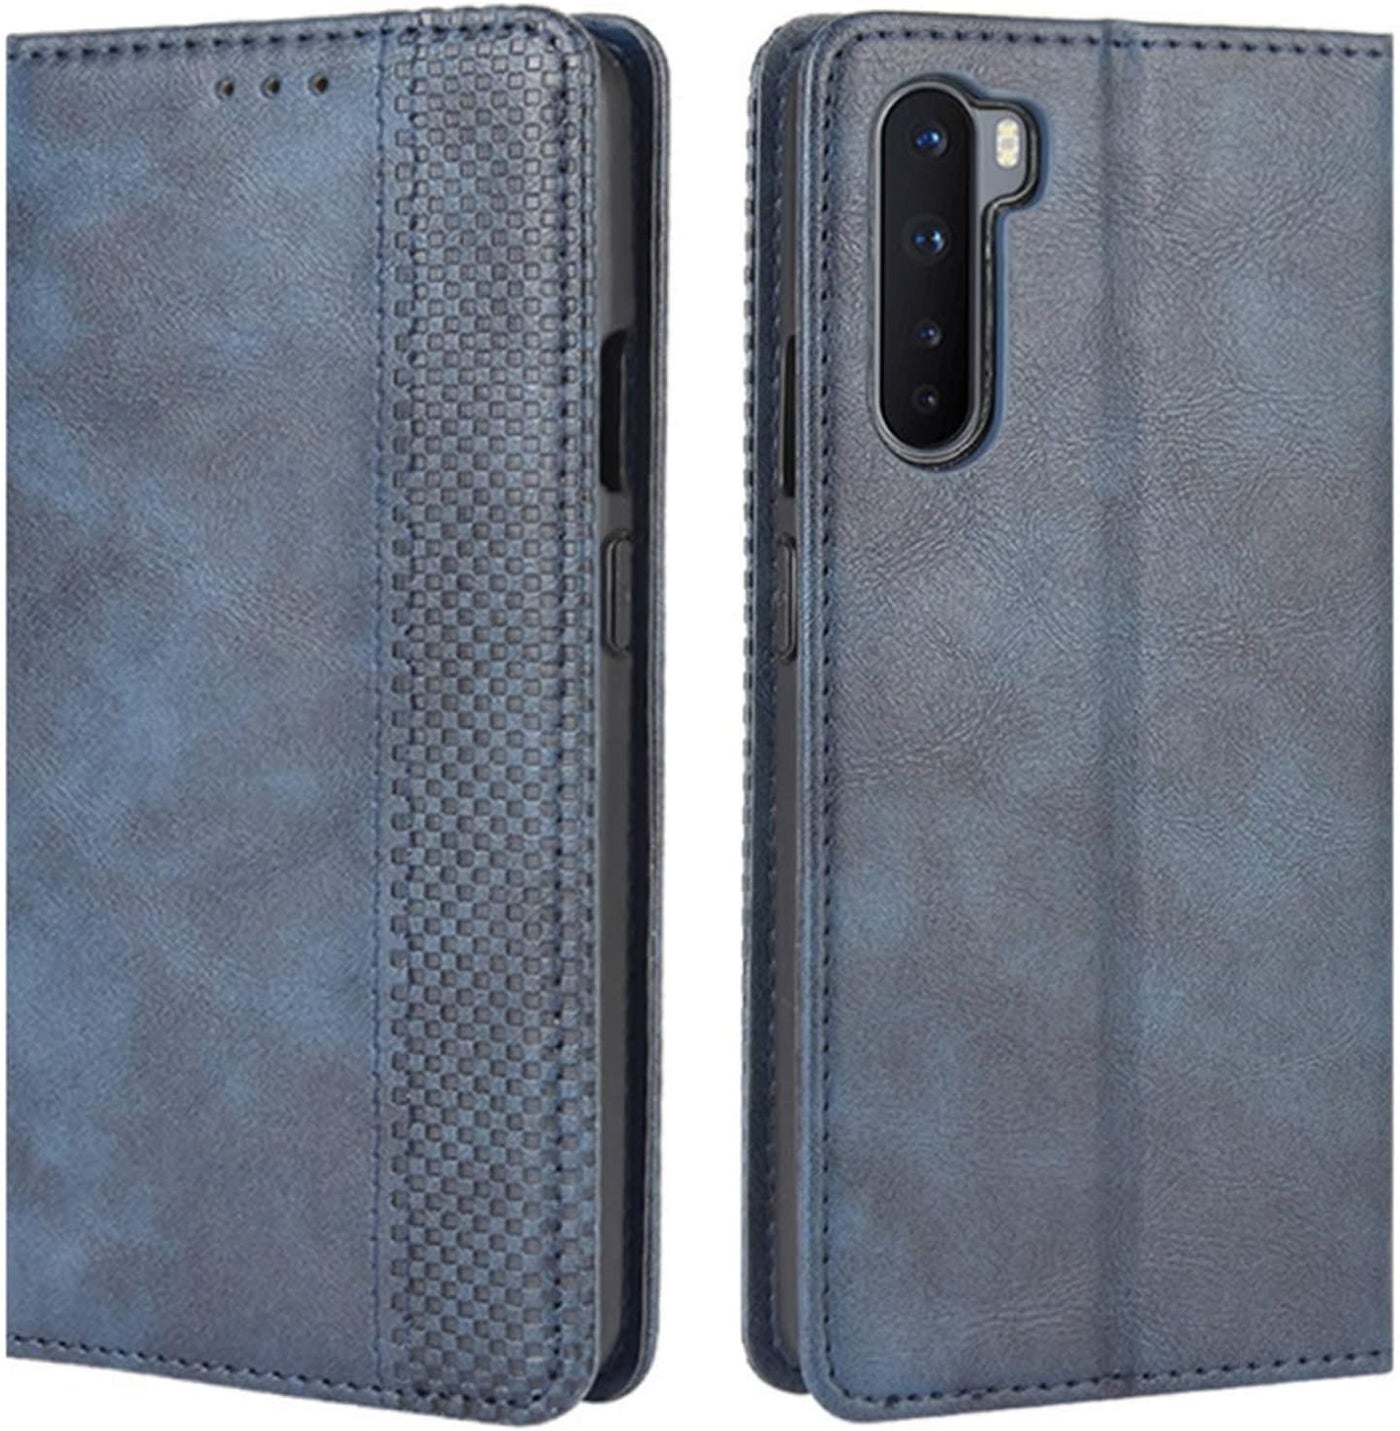 Oneplus Nord blue color leather wallet flip cover case By excelsior